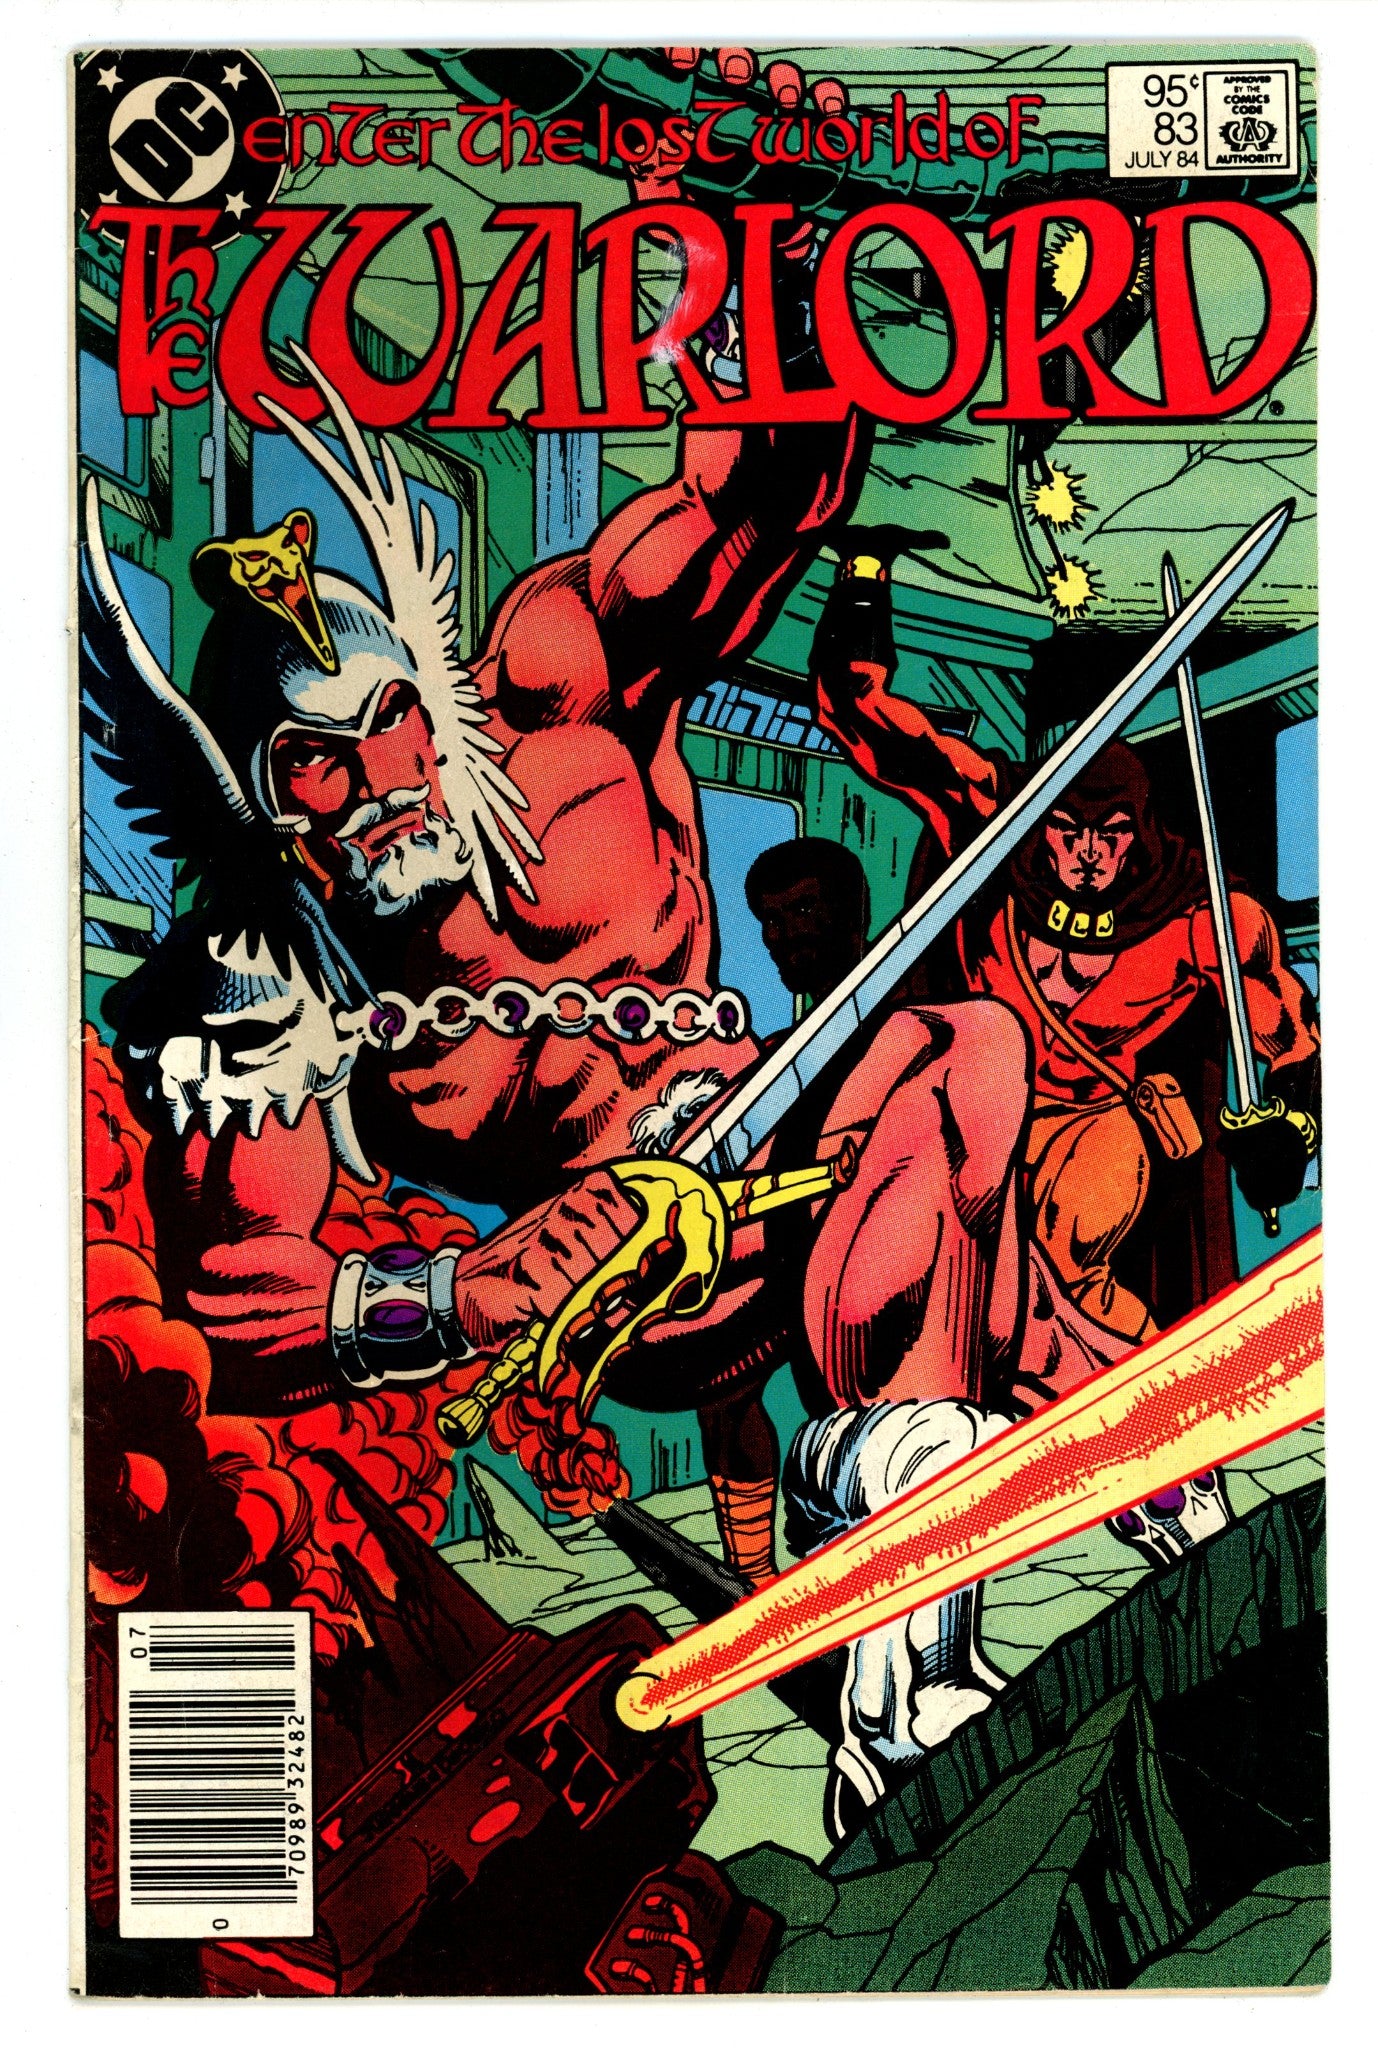 Warlord Vol 1 83 VG- (3.5) (1984) Canadian Price Variant 